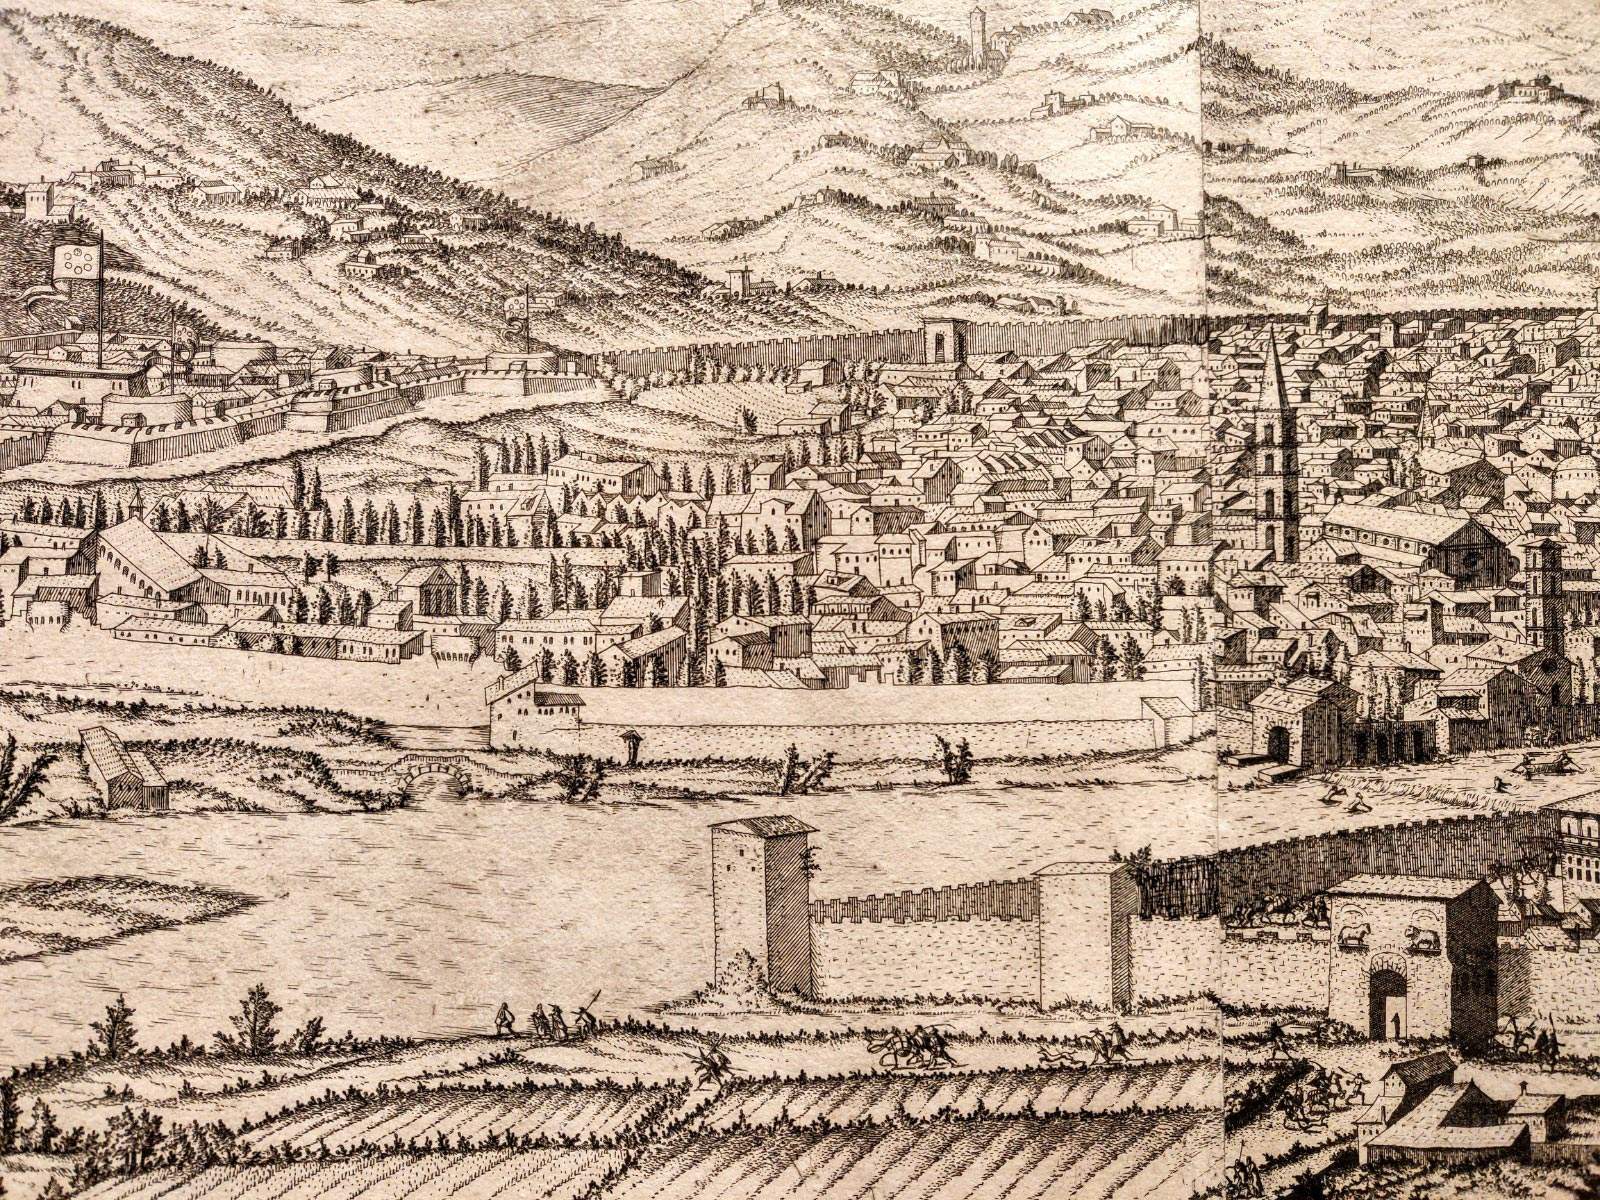 This is what Florence looked like in the Renaissance: the Uffizi acquires an extremely rare view of the city from 1557